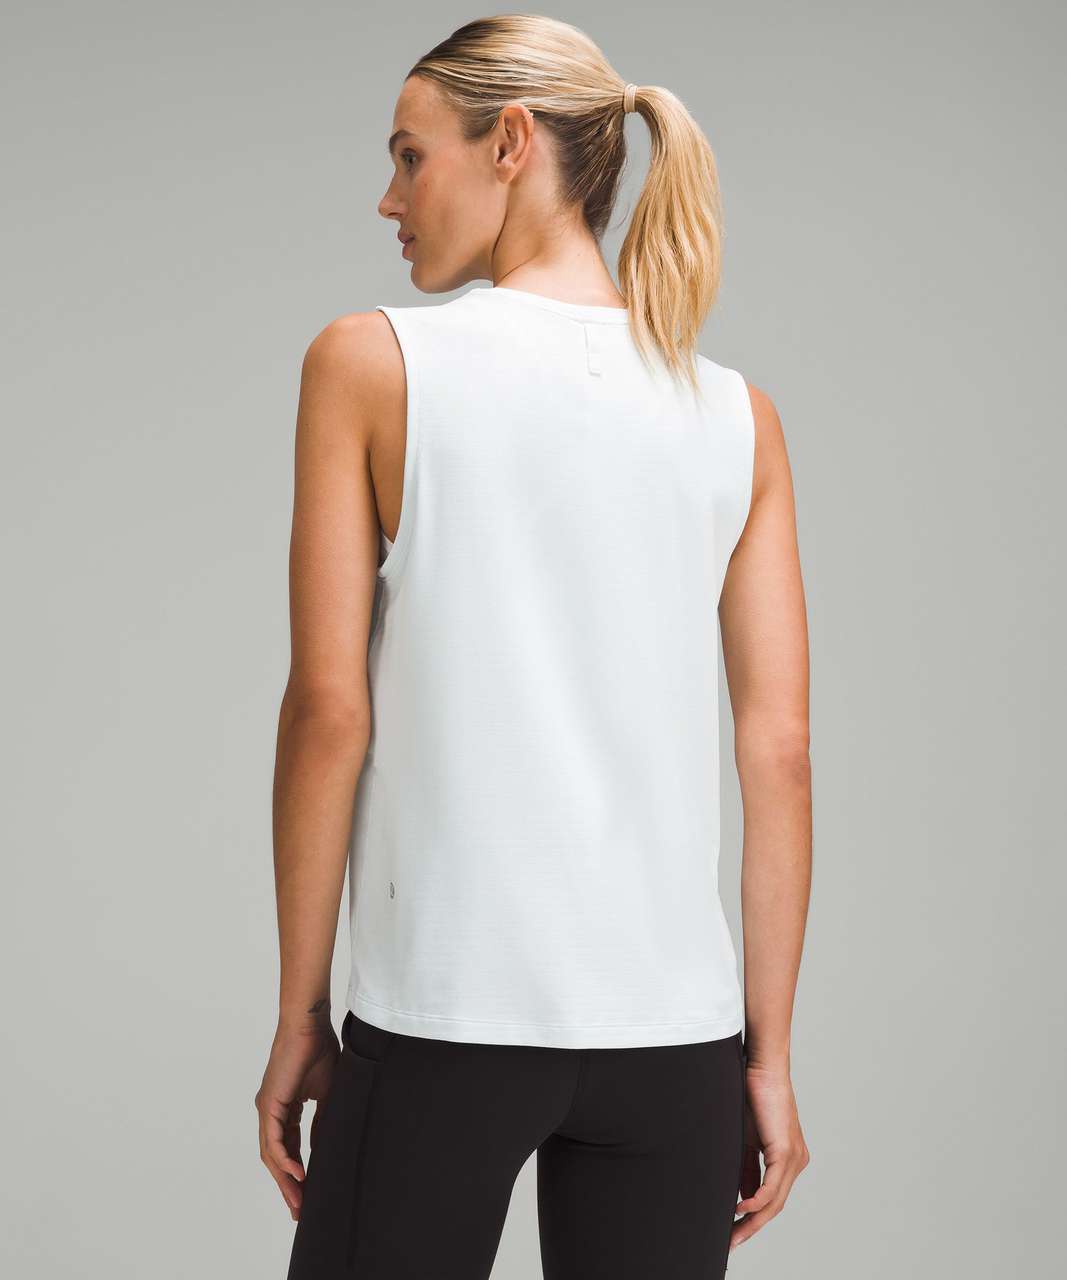 Lululemon License to Train Classic-Fit Tank Top - Heathered Sheer Blue